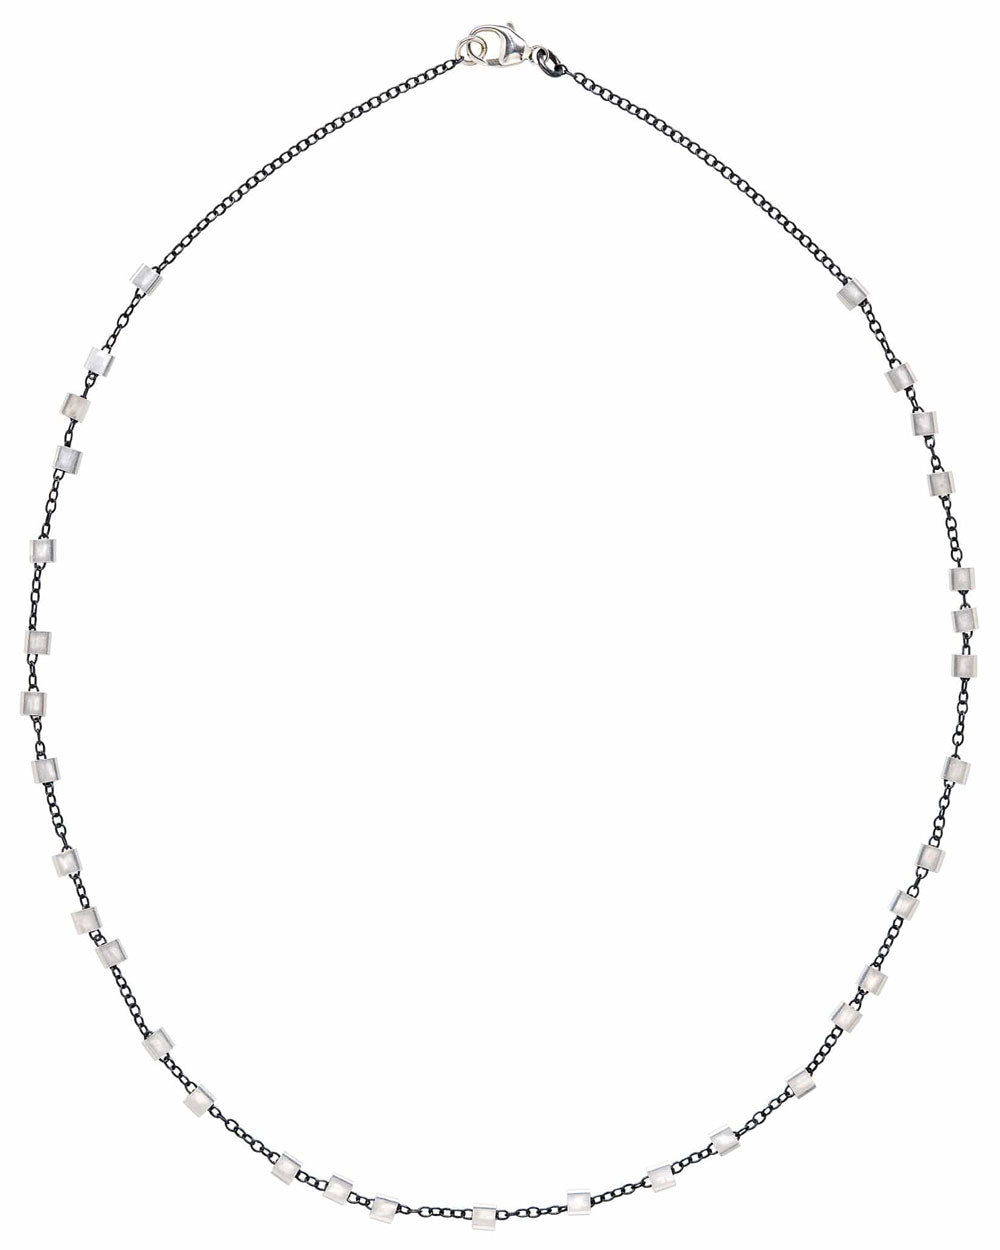 Bertoia Sterling Silver Chain Necklace